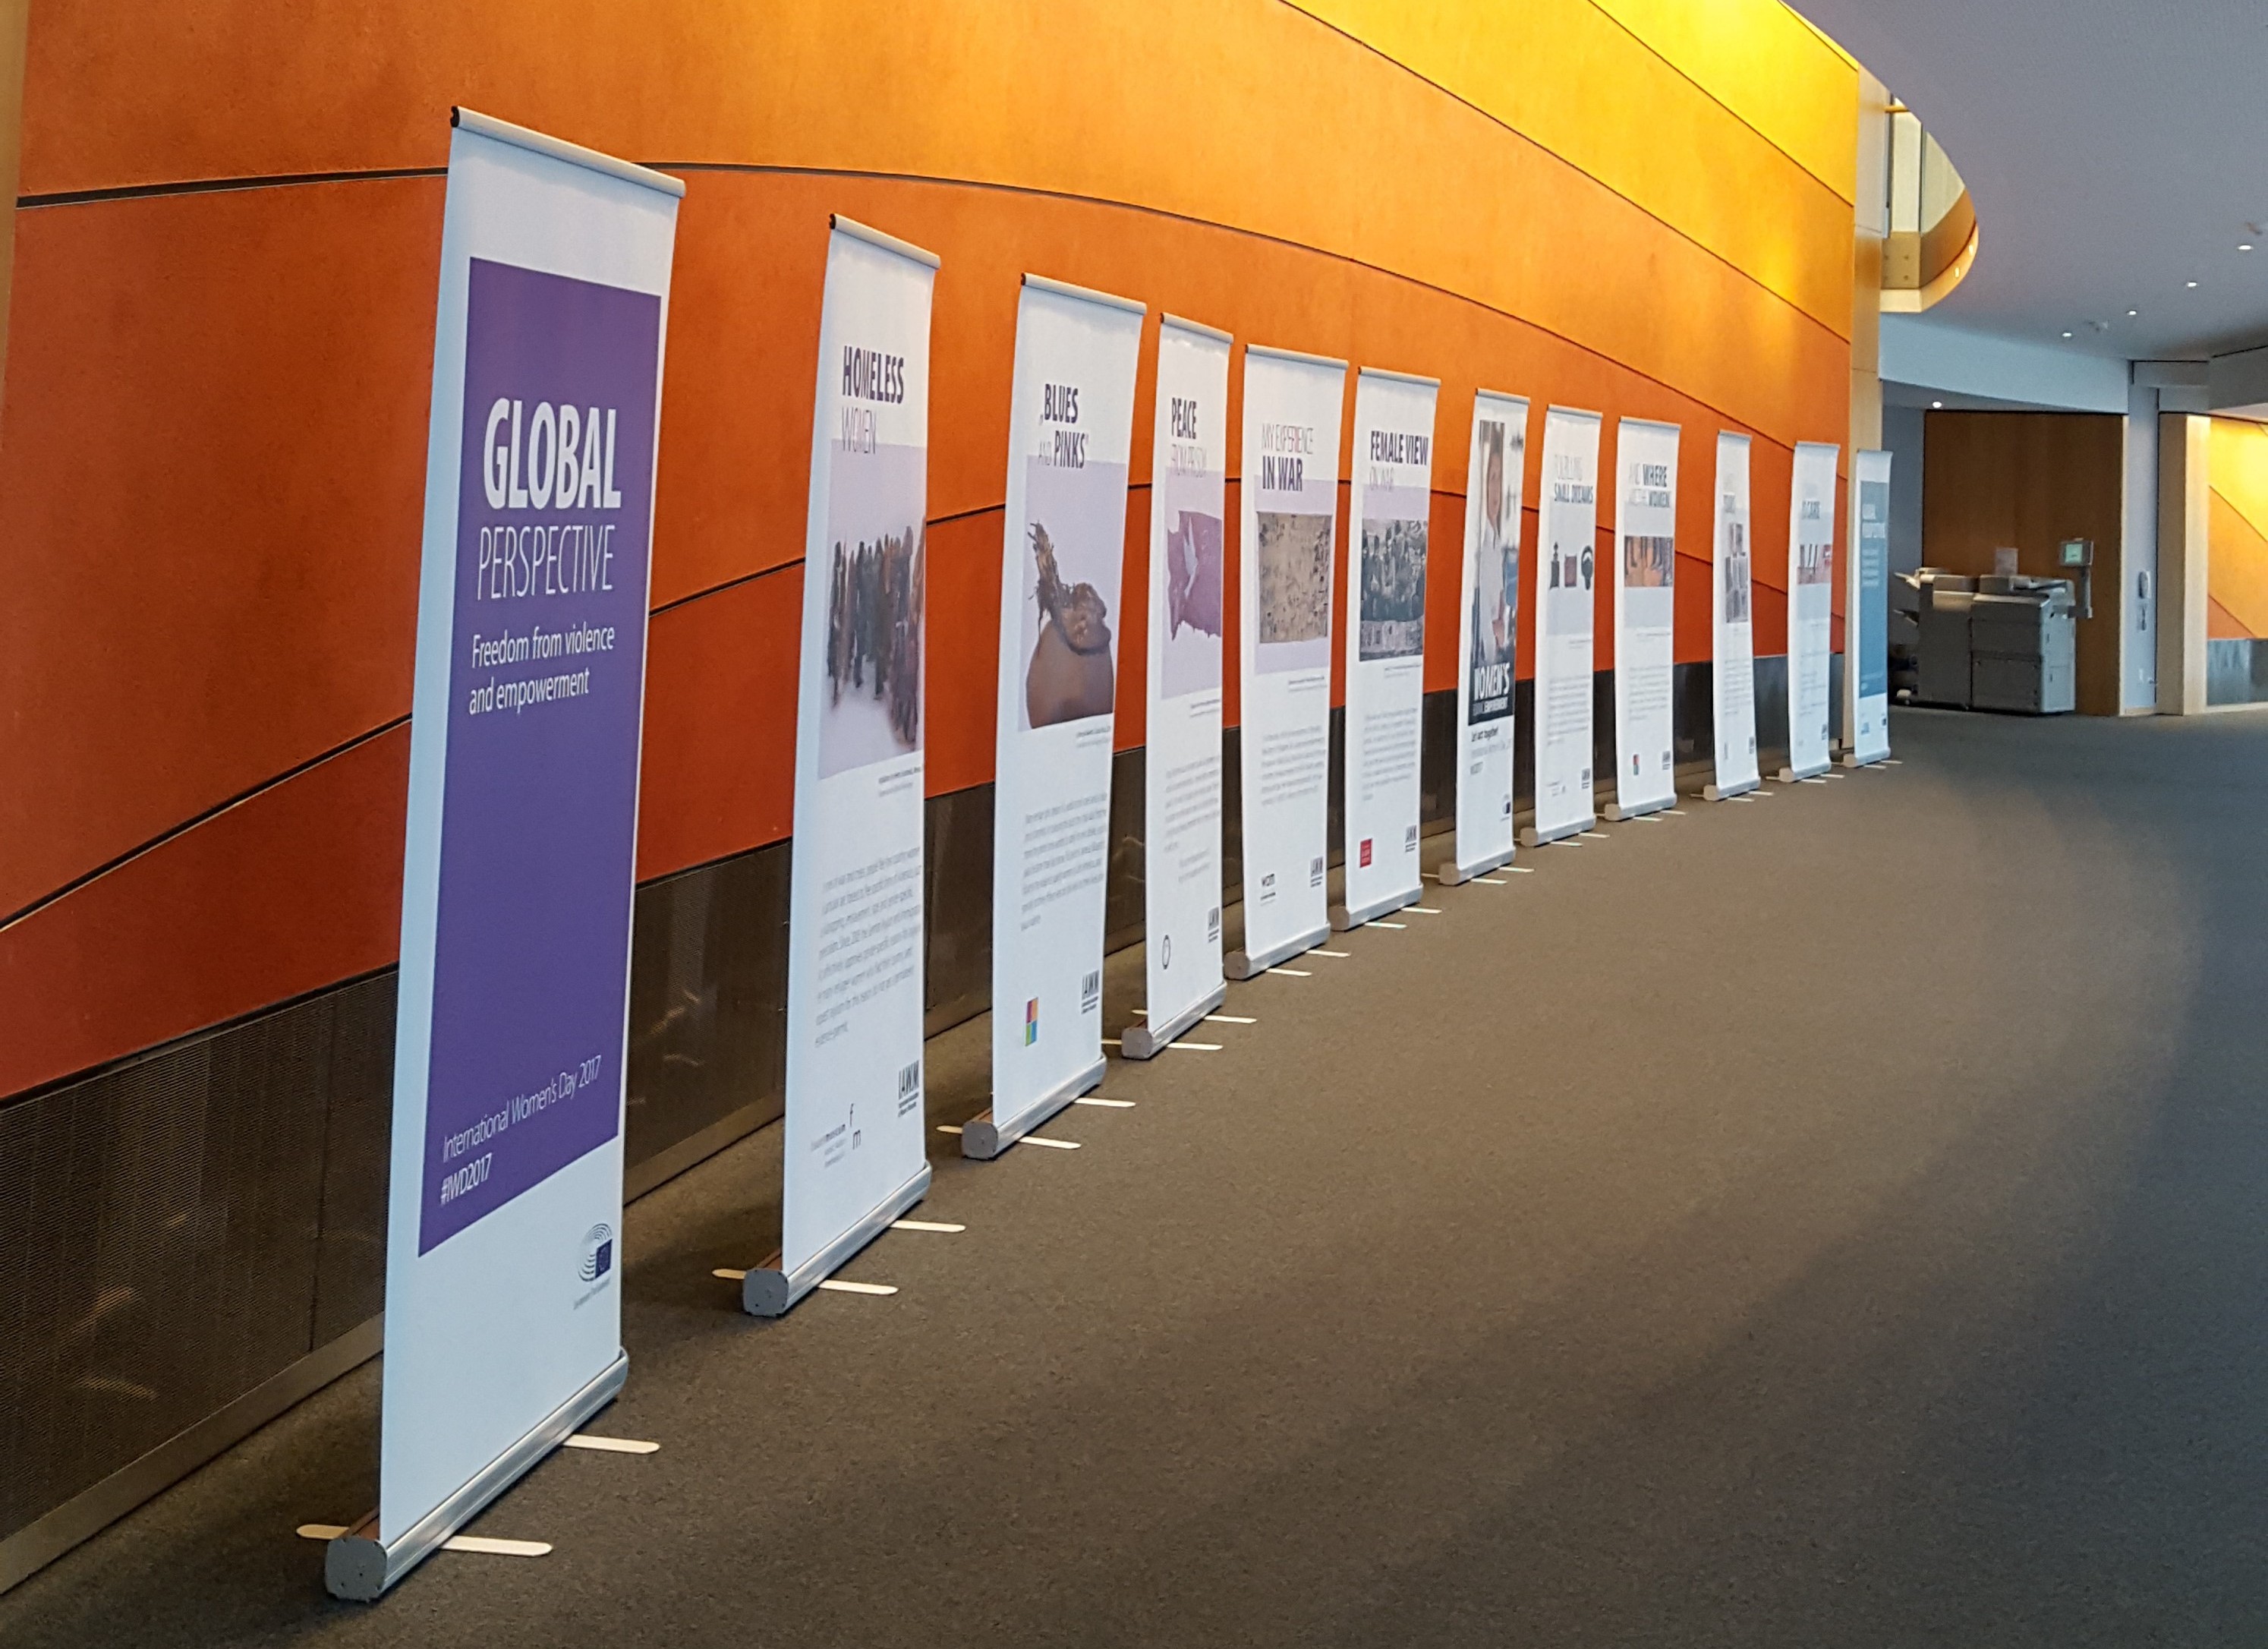 Pop-up banners at the Parliament exhibition